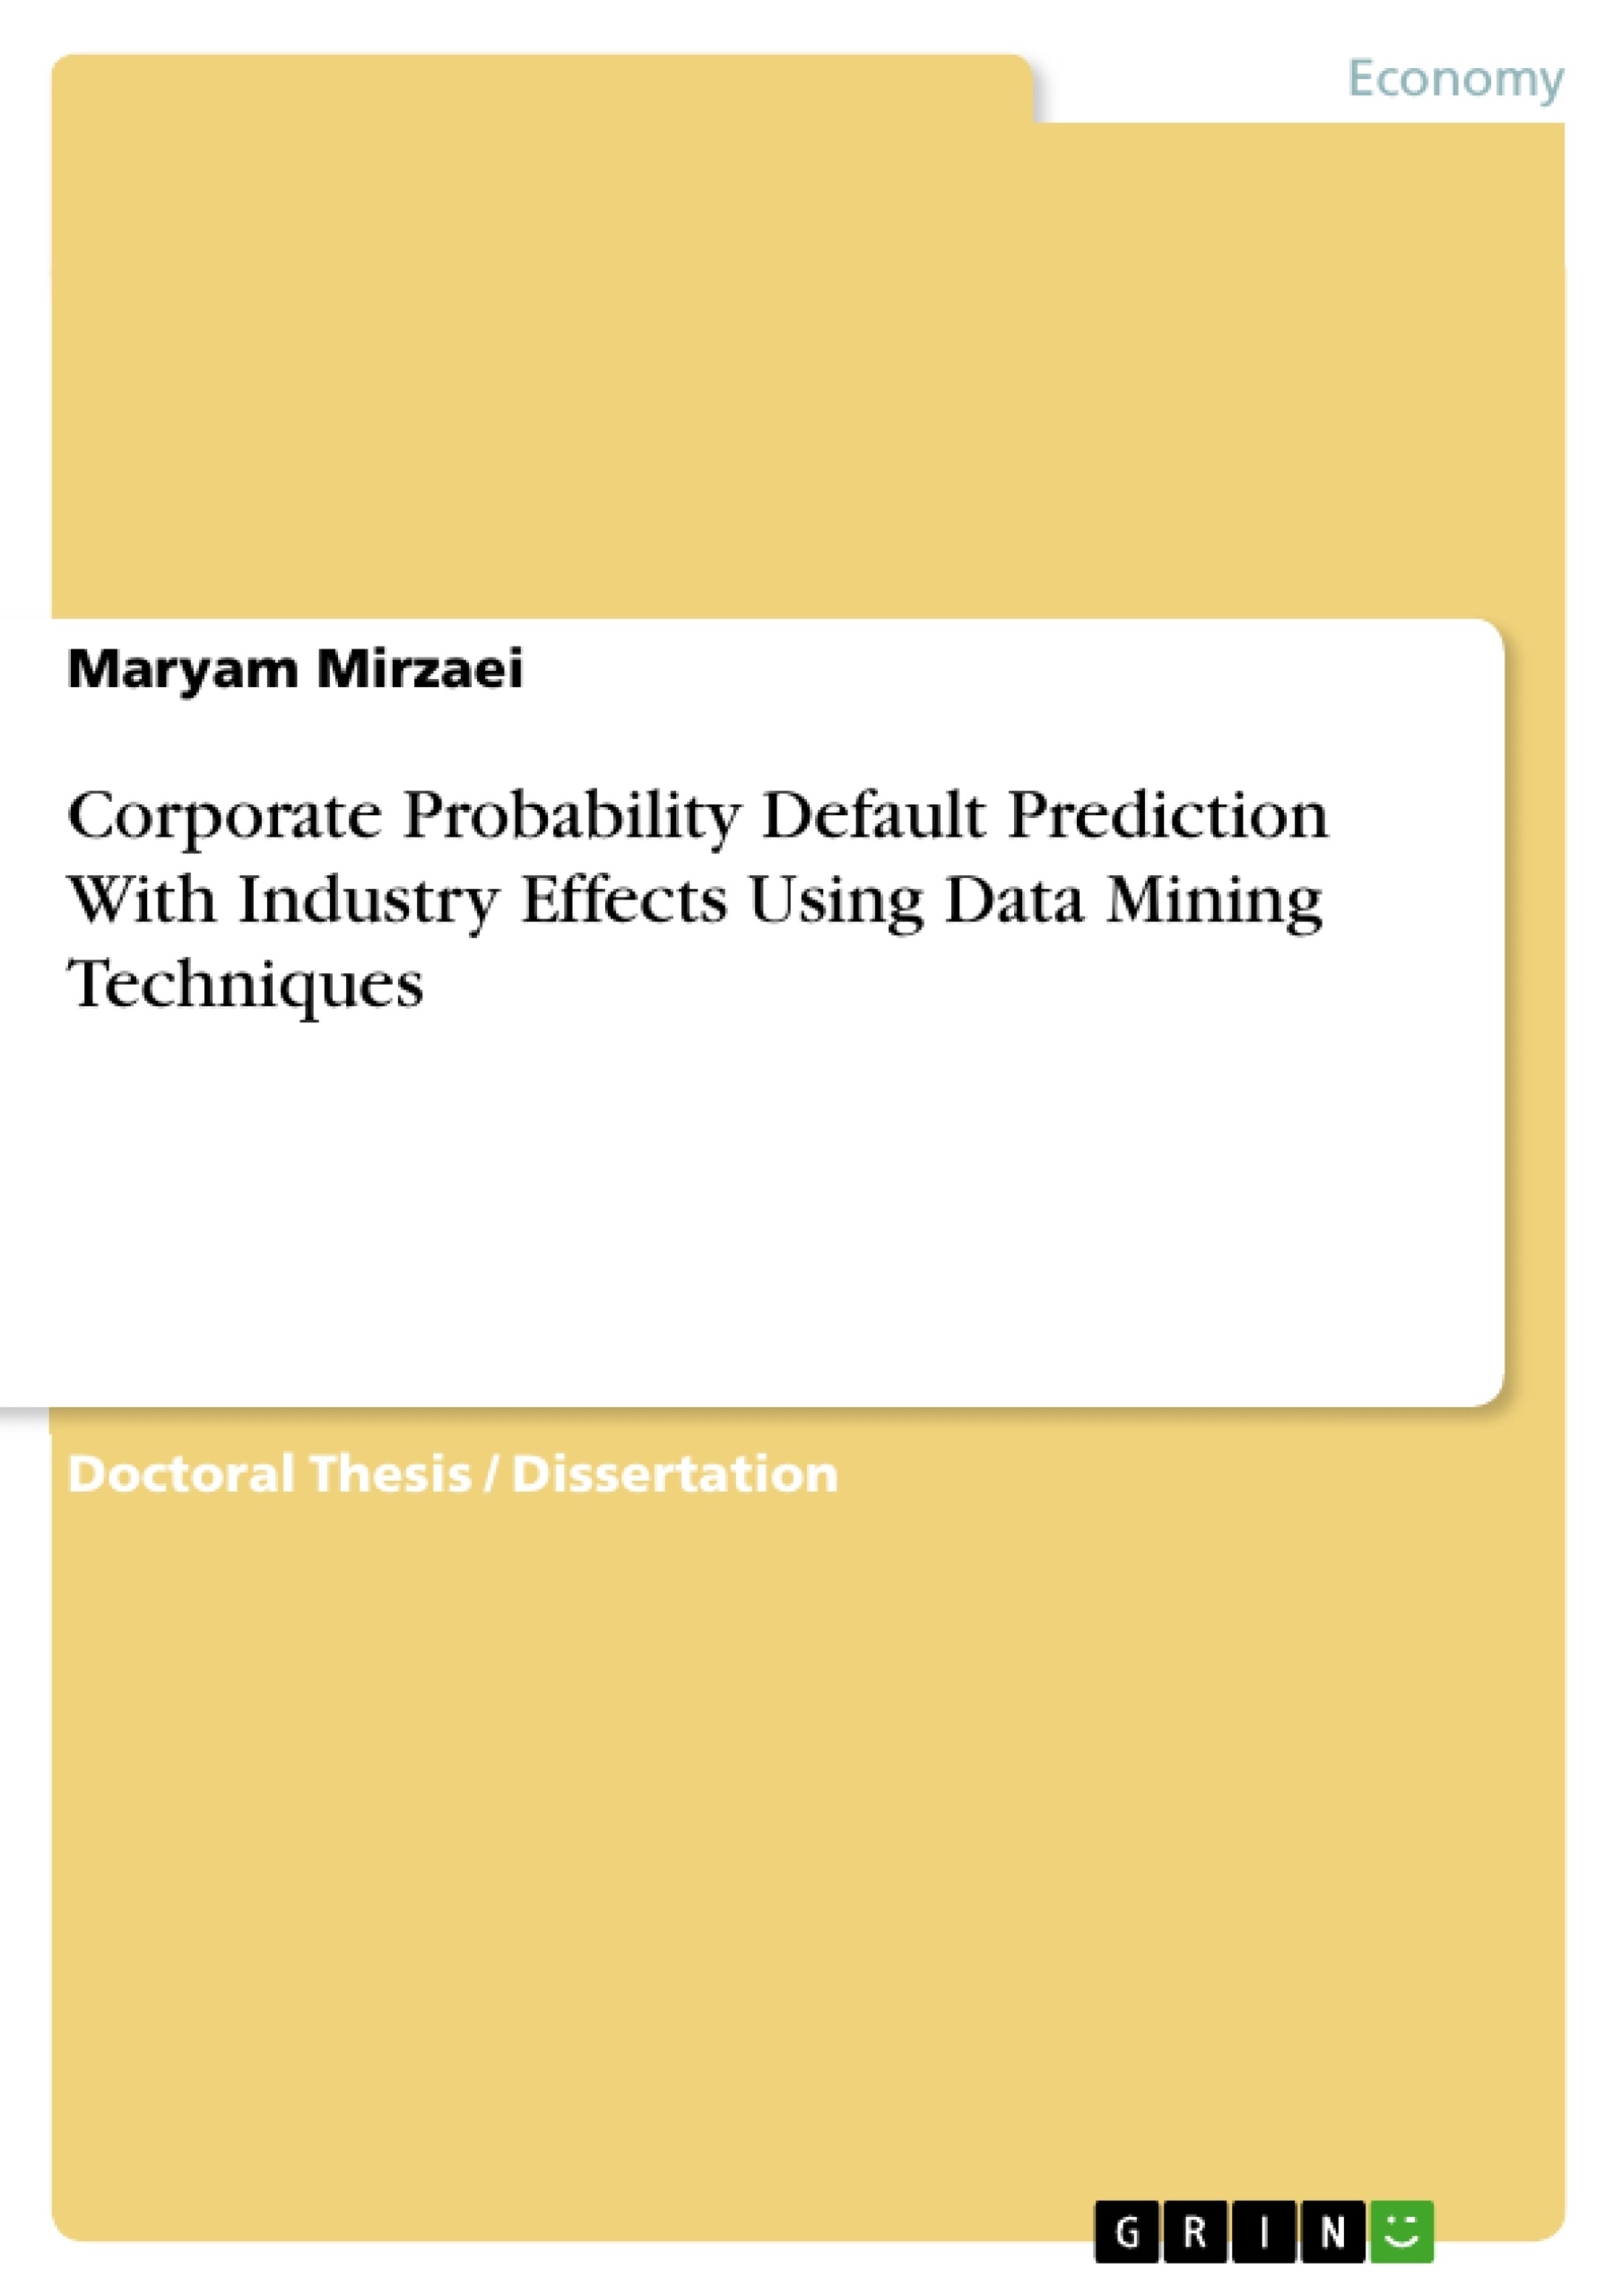 Title: Corporate Probability Default Prediction With Industry Effects Using Data Mining Techniques